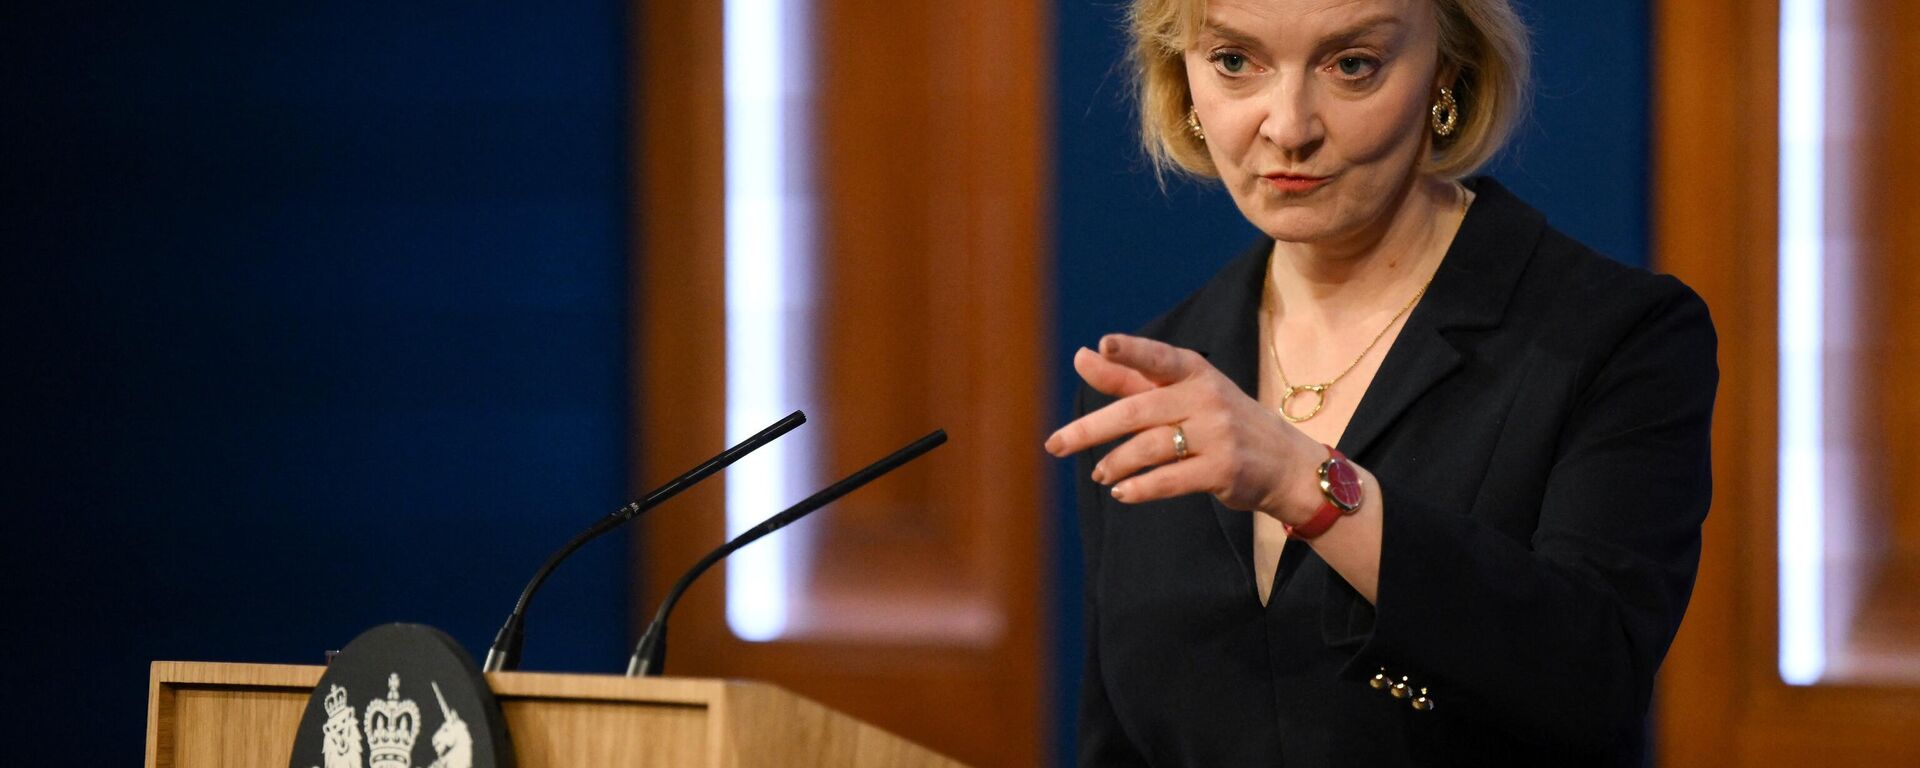 Britain's Prime Minister Liz Truss holds a press conference in the Downing Street Briefing Room in central London on October 14, 2022 - Sputnik International, 1920, 20.10.2022